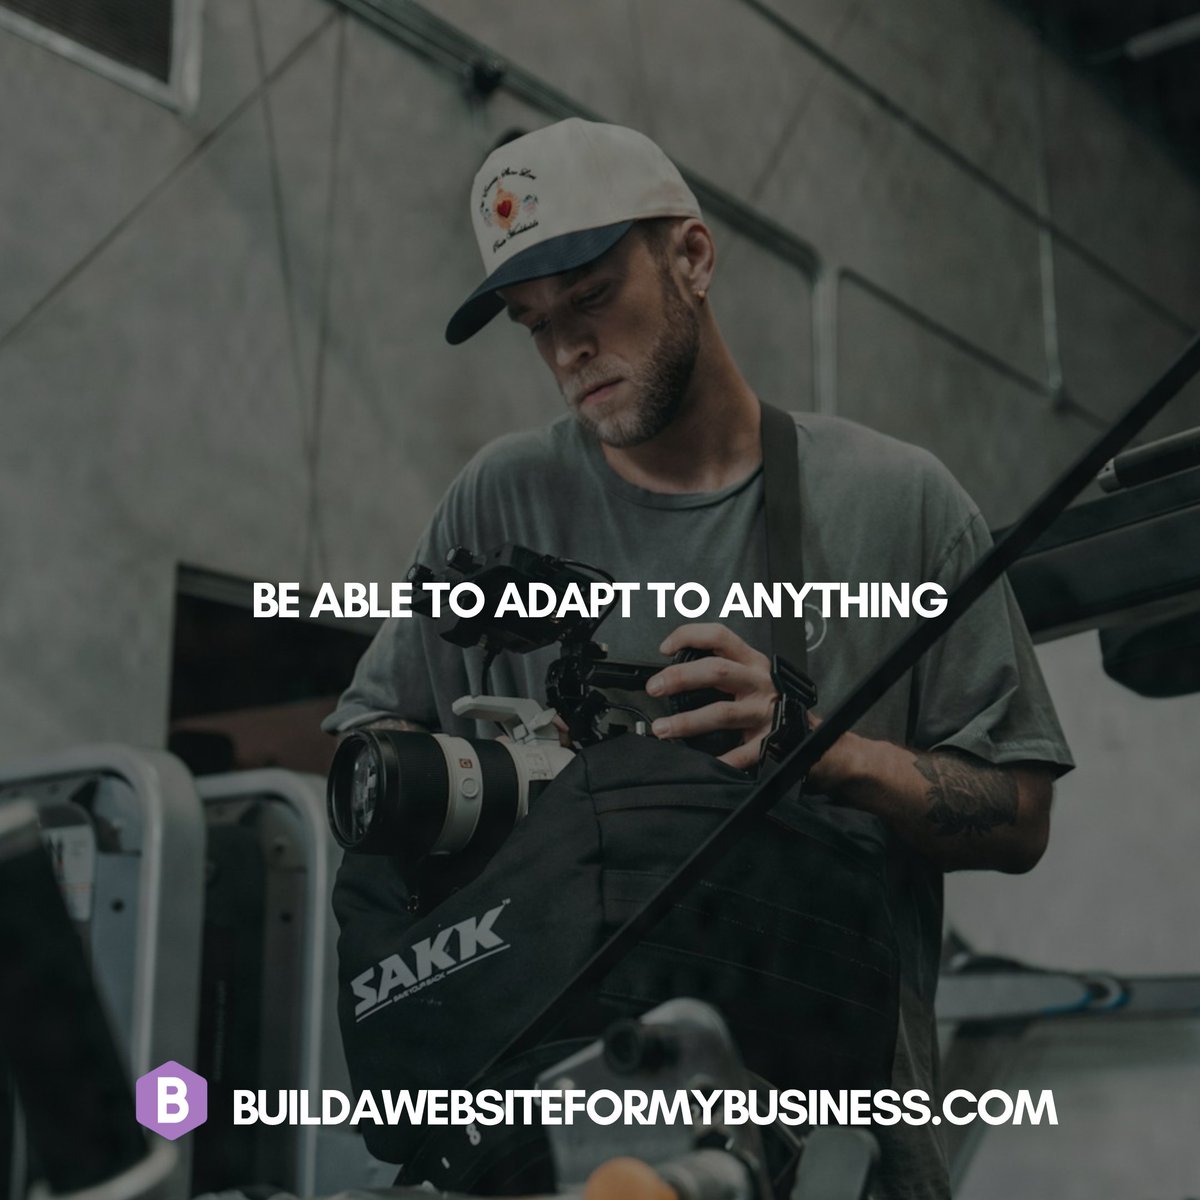 BE ABLE TO ADAPT TO ANYTHING. Let us build your website while you build your business buildawebsiteformybusiness.com 
.
.
#quotes #InspirationDaily #QuoteOfTheDay #MotivationalQuotes #InspirationalQuotes #Positivity #PositiveMindset #SelfImprovement #DreamBig #AchieveGreatness